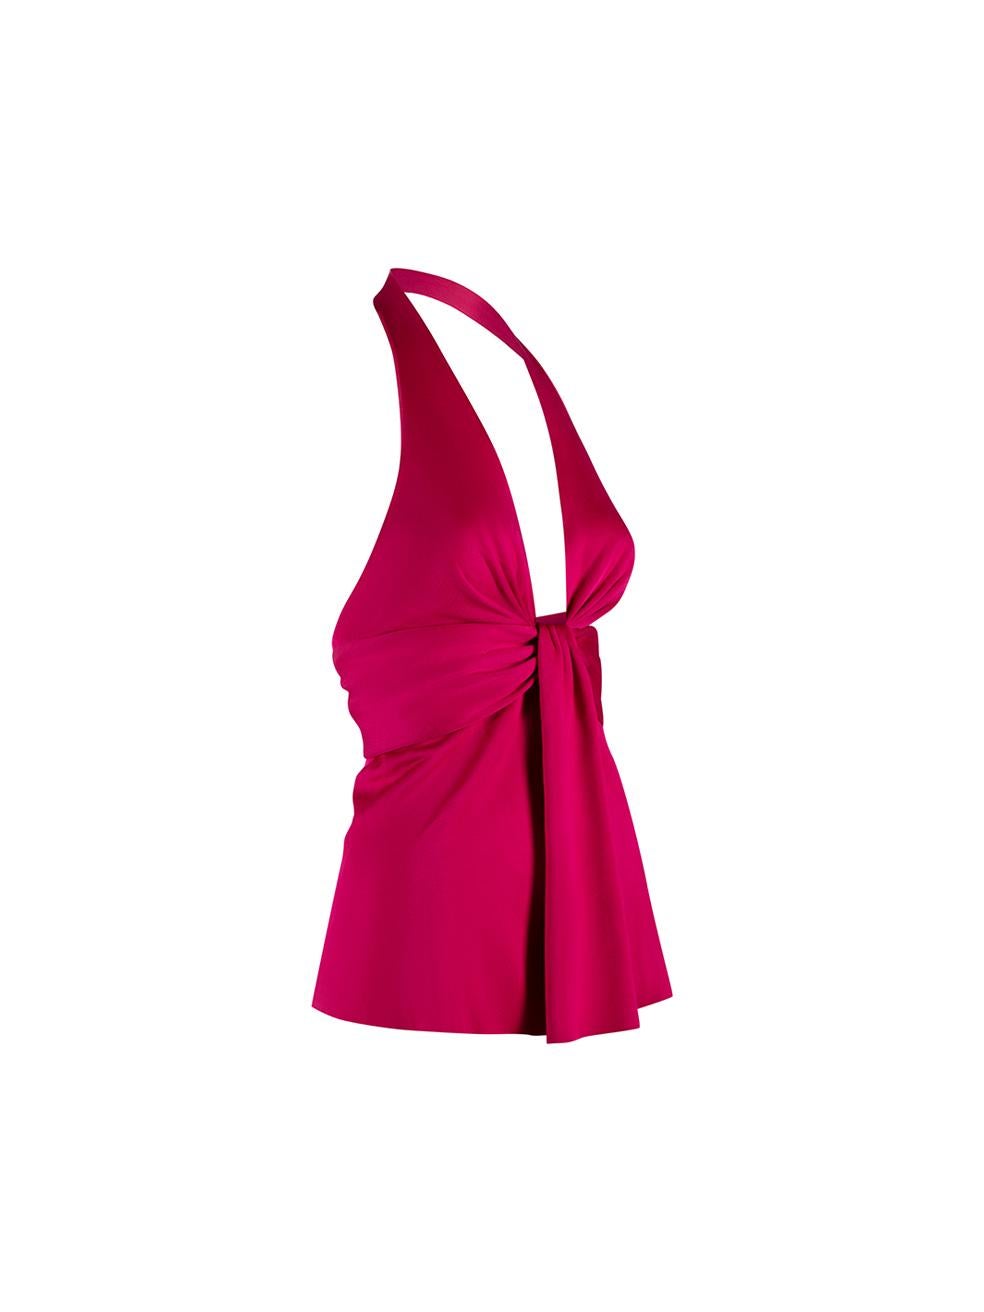 CONDITION is Very good. Minimal wear to top is evident. Minimal wear to raw edges at neckline and negligible mark near hem at centre front on this used Balenciaga designer resale item. 



Details


Pink

Viscose

Sleeveless top

Halter neck

Bow